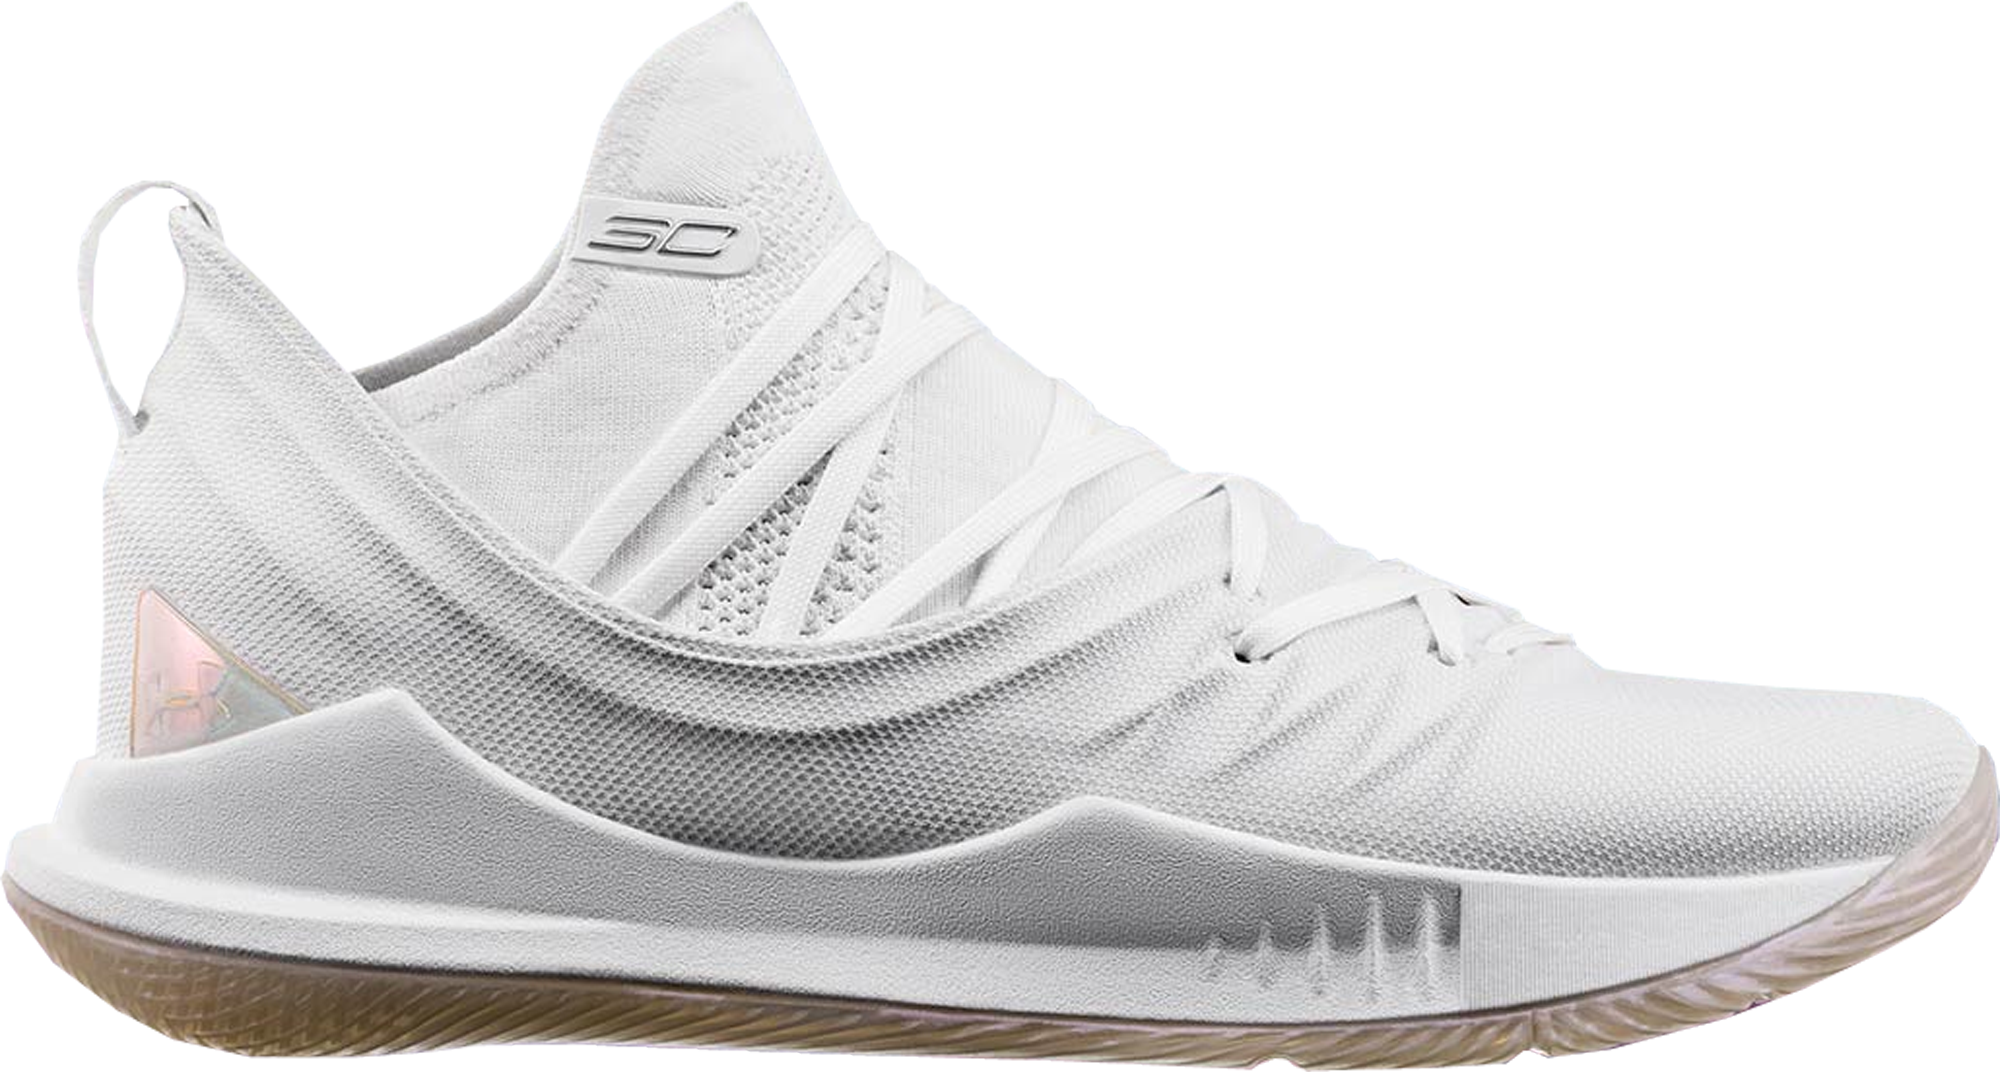 curry 5s white